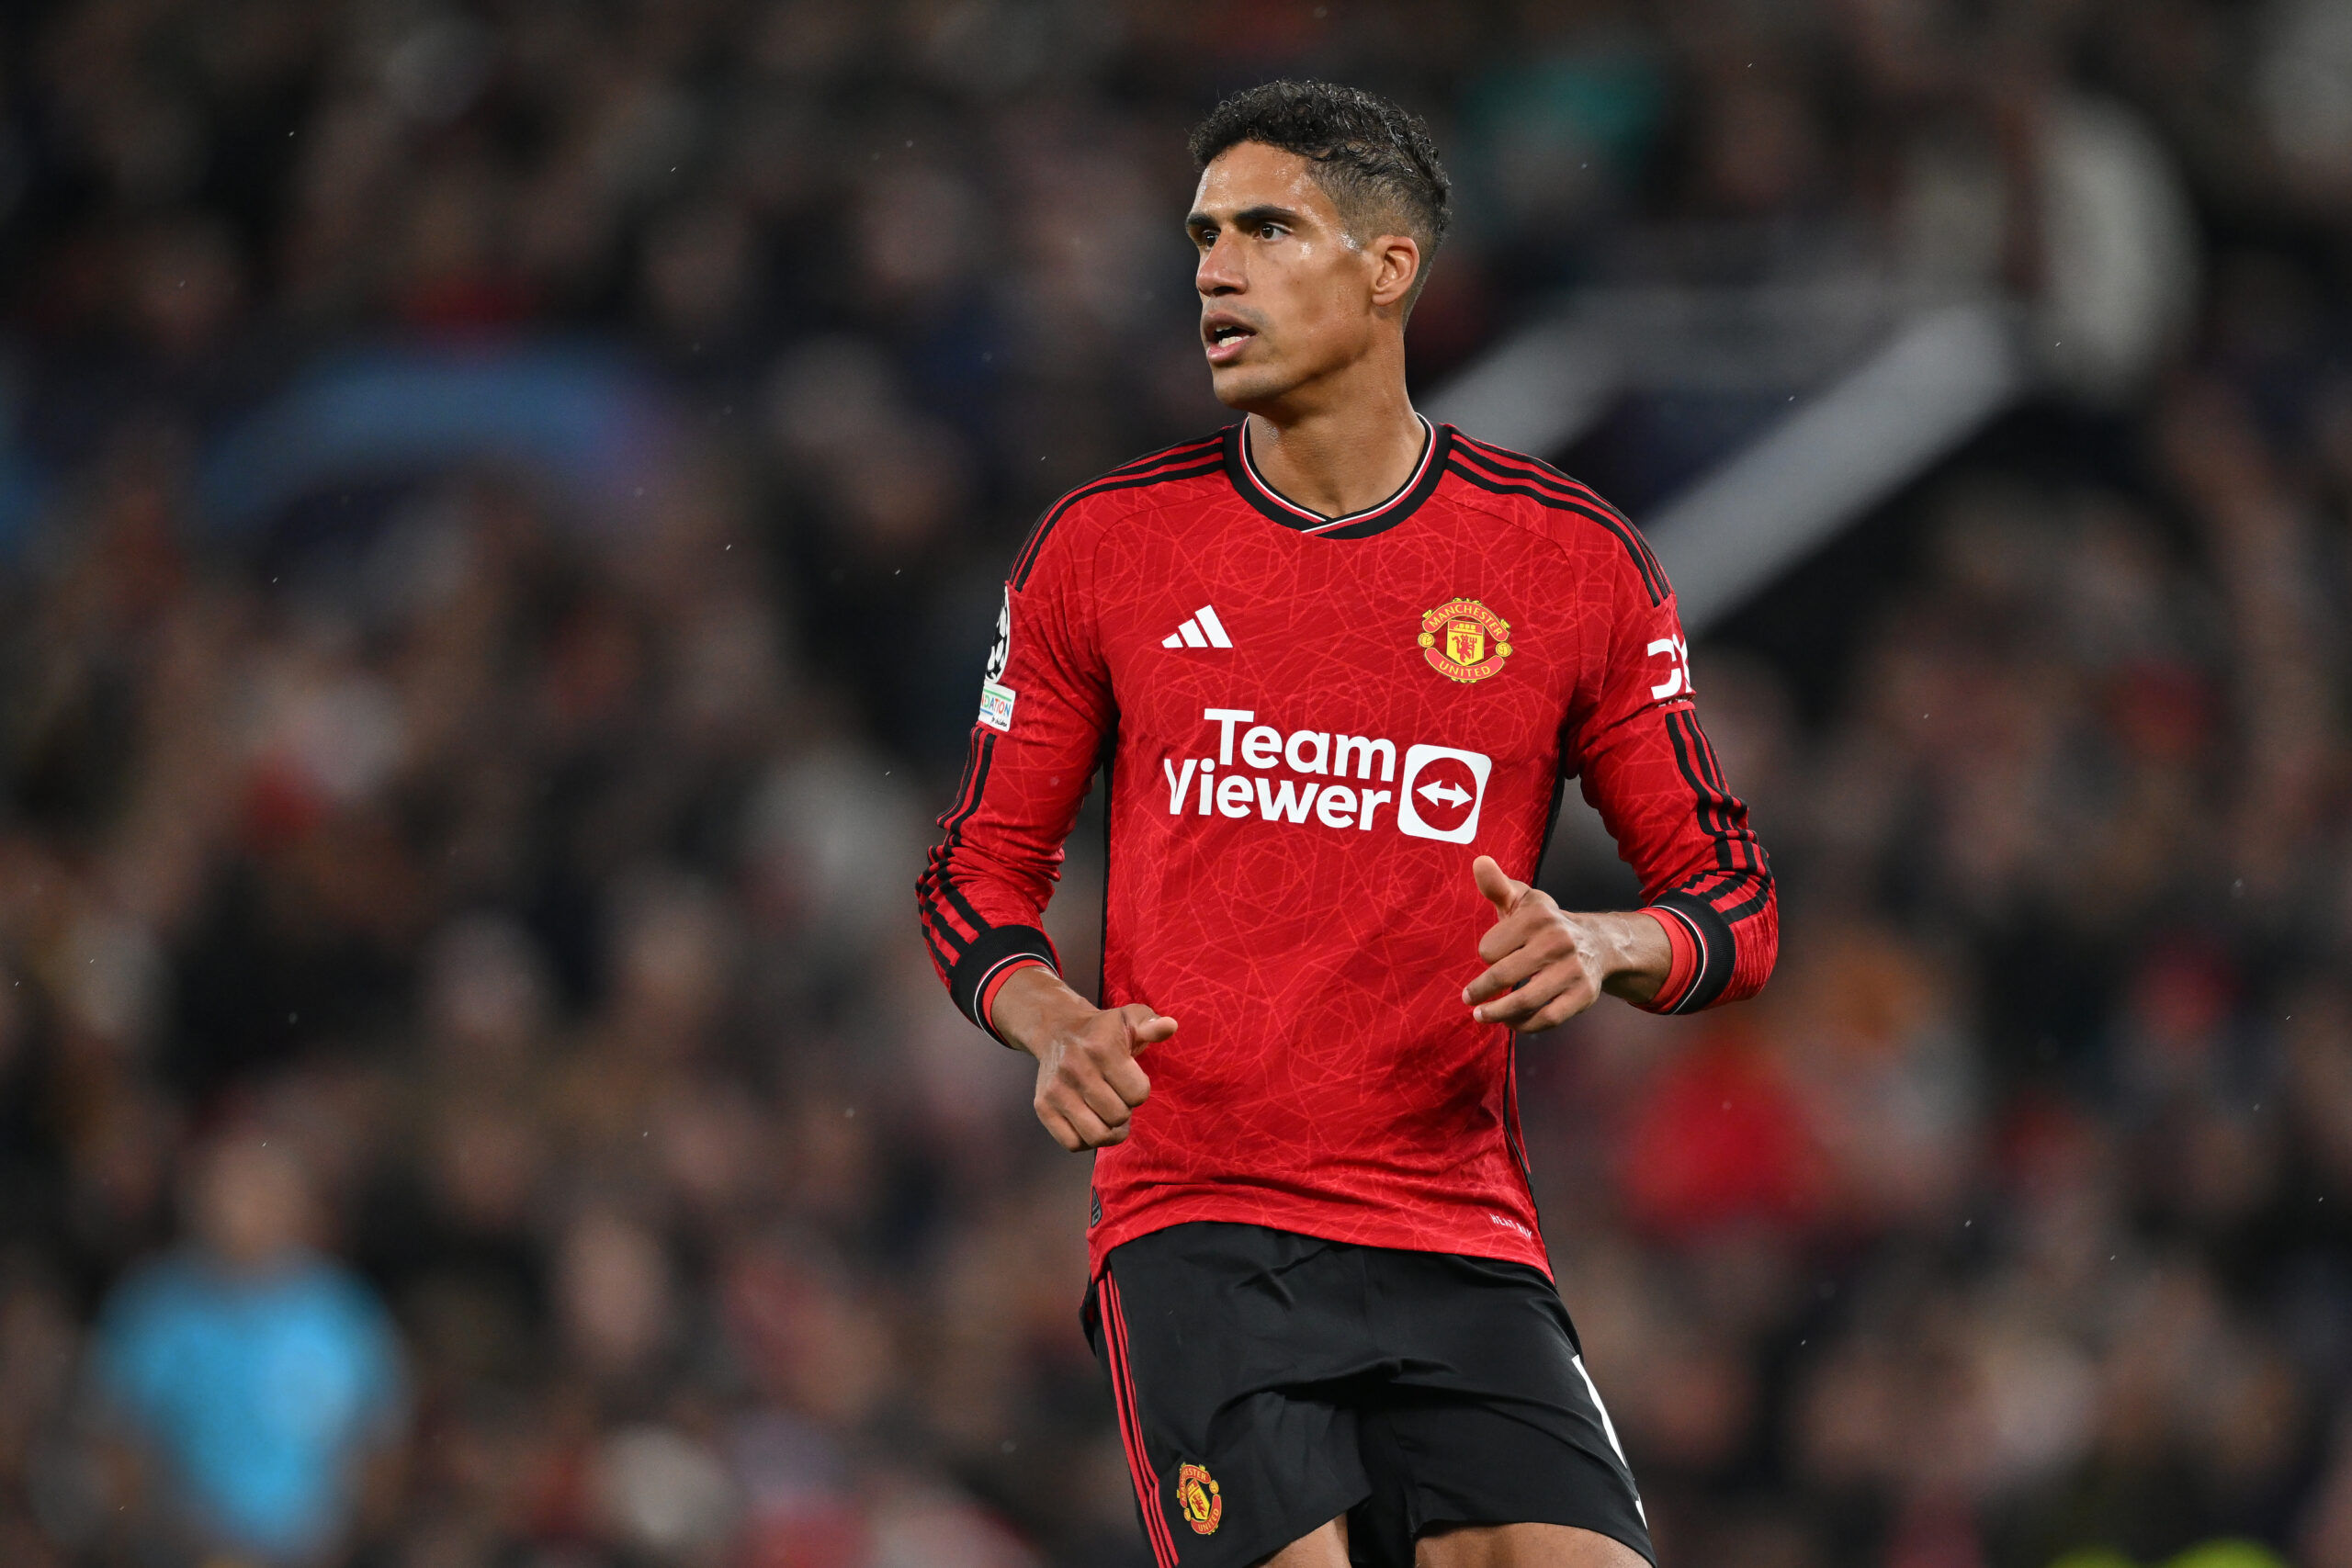 MANCHESTER, ENGLAND - OCTOBER 03: Raphael Varane of Manchester United looks on during the UEFA Champions League match between Manchester United and Galatasaray A.S at Old Trafford on October 03, 2023 in Manchester, England. (Photo by Michael Regan/Getty Images)